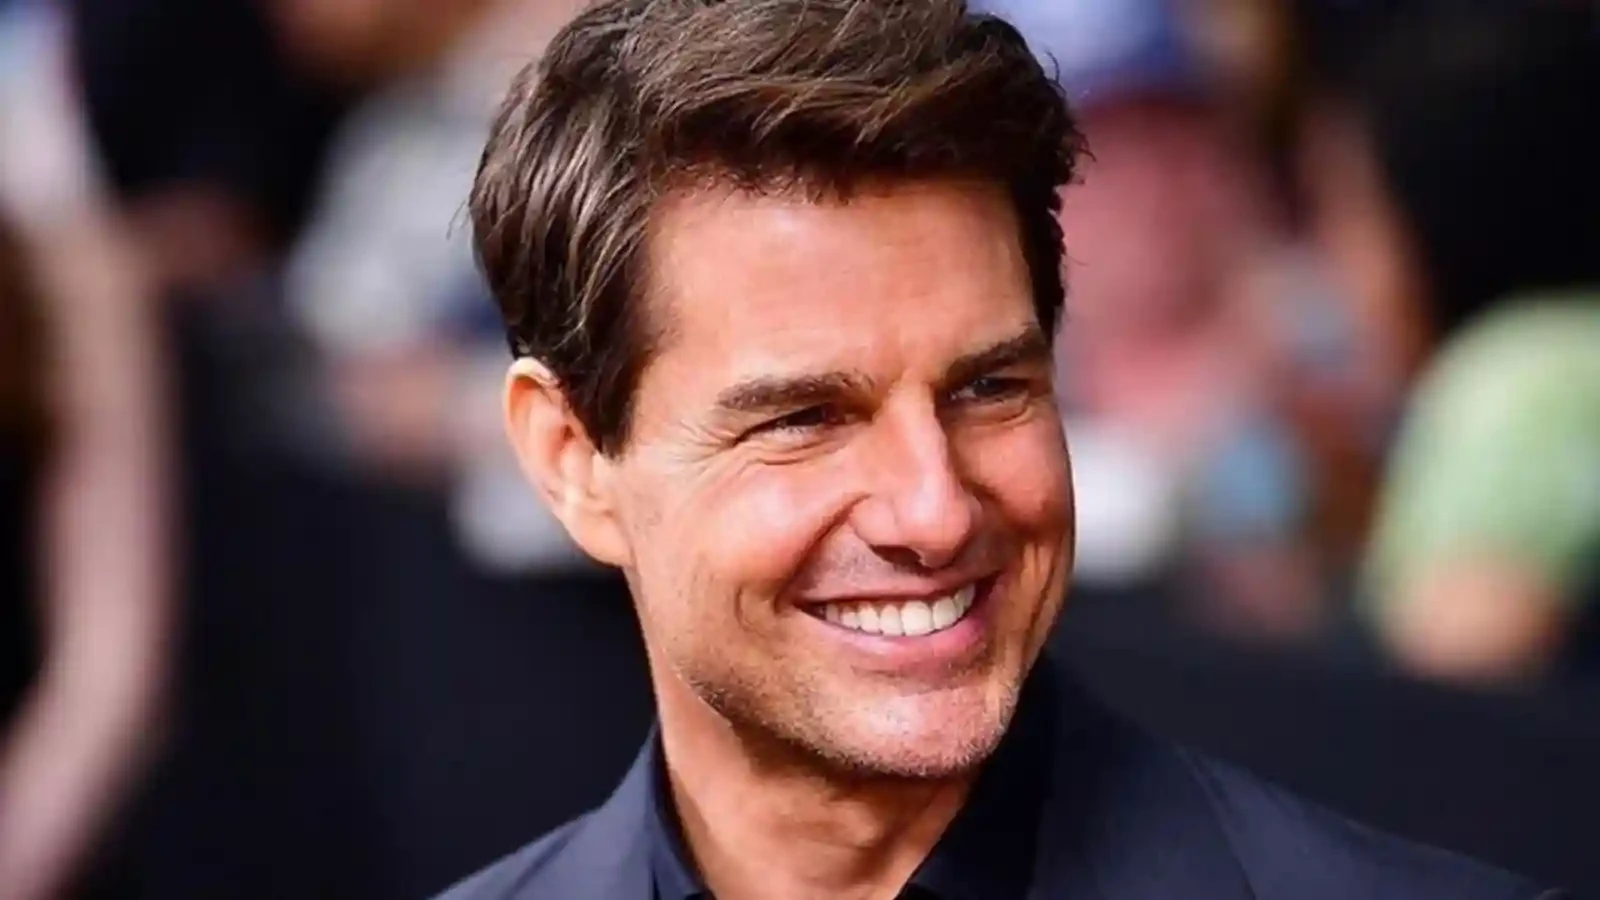 Tom Cruise is best known for his incredible stunts and action sequences